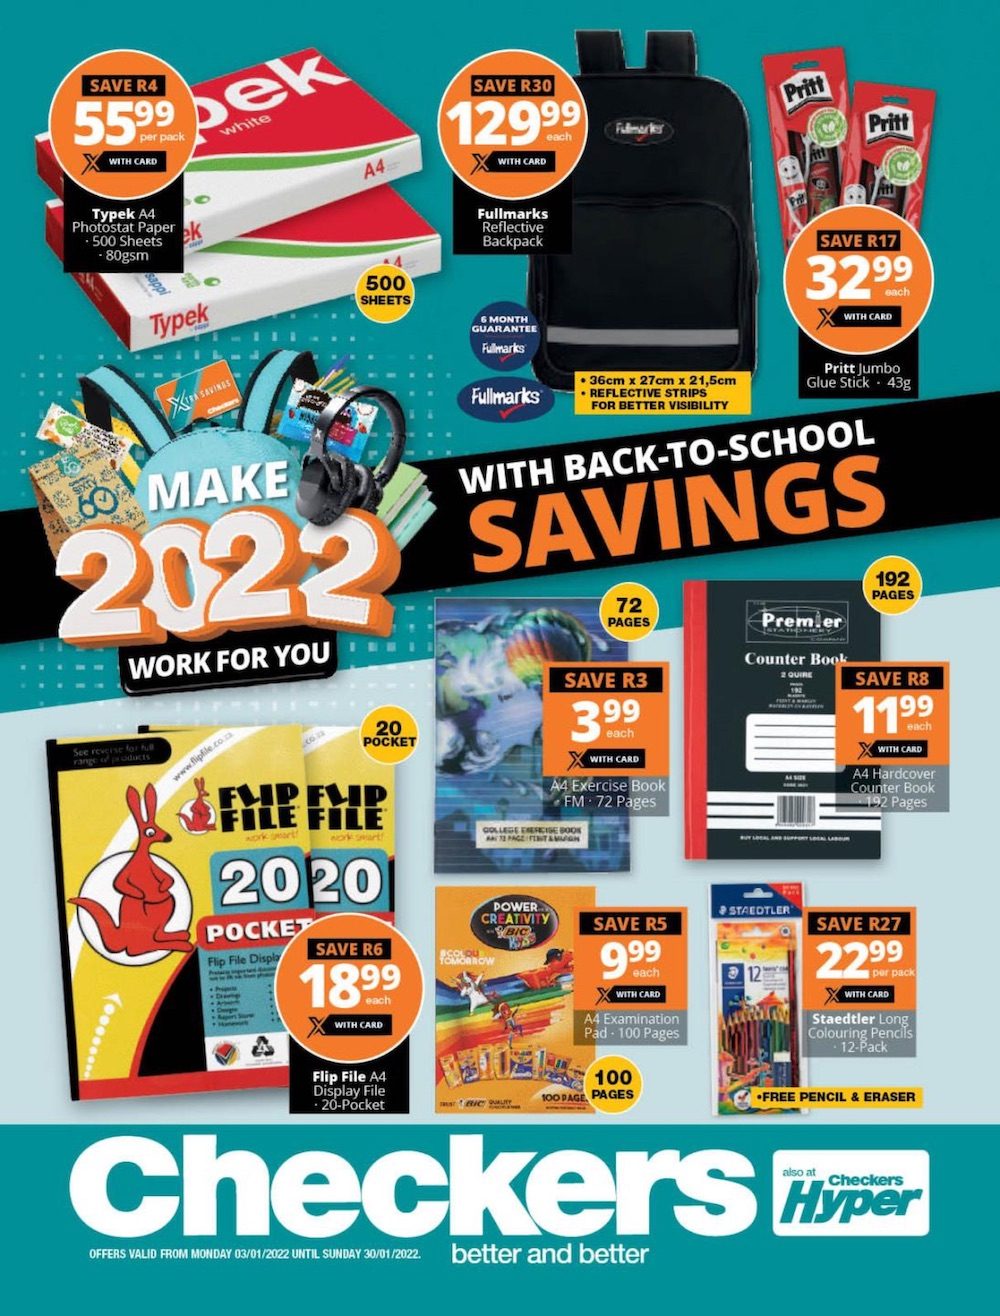 Checkers Specials Back to School 3 – 30 Jan 2022